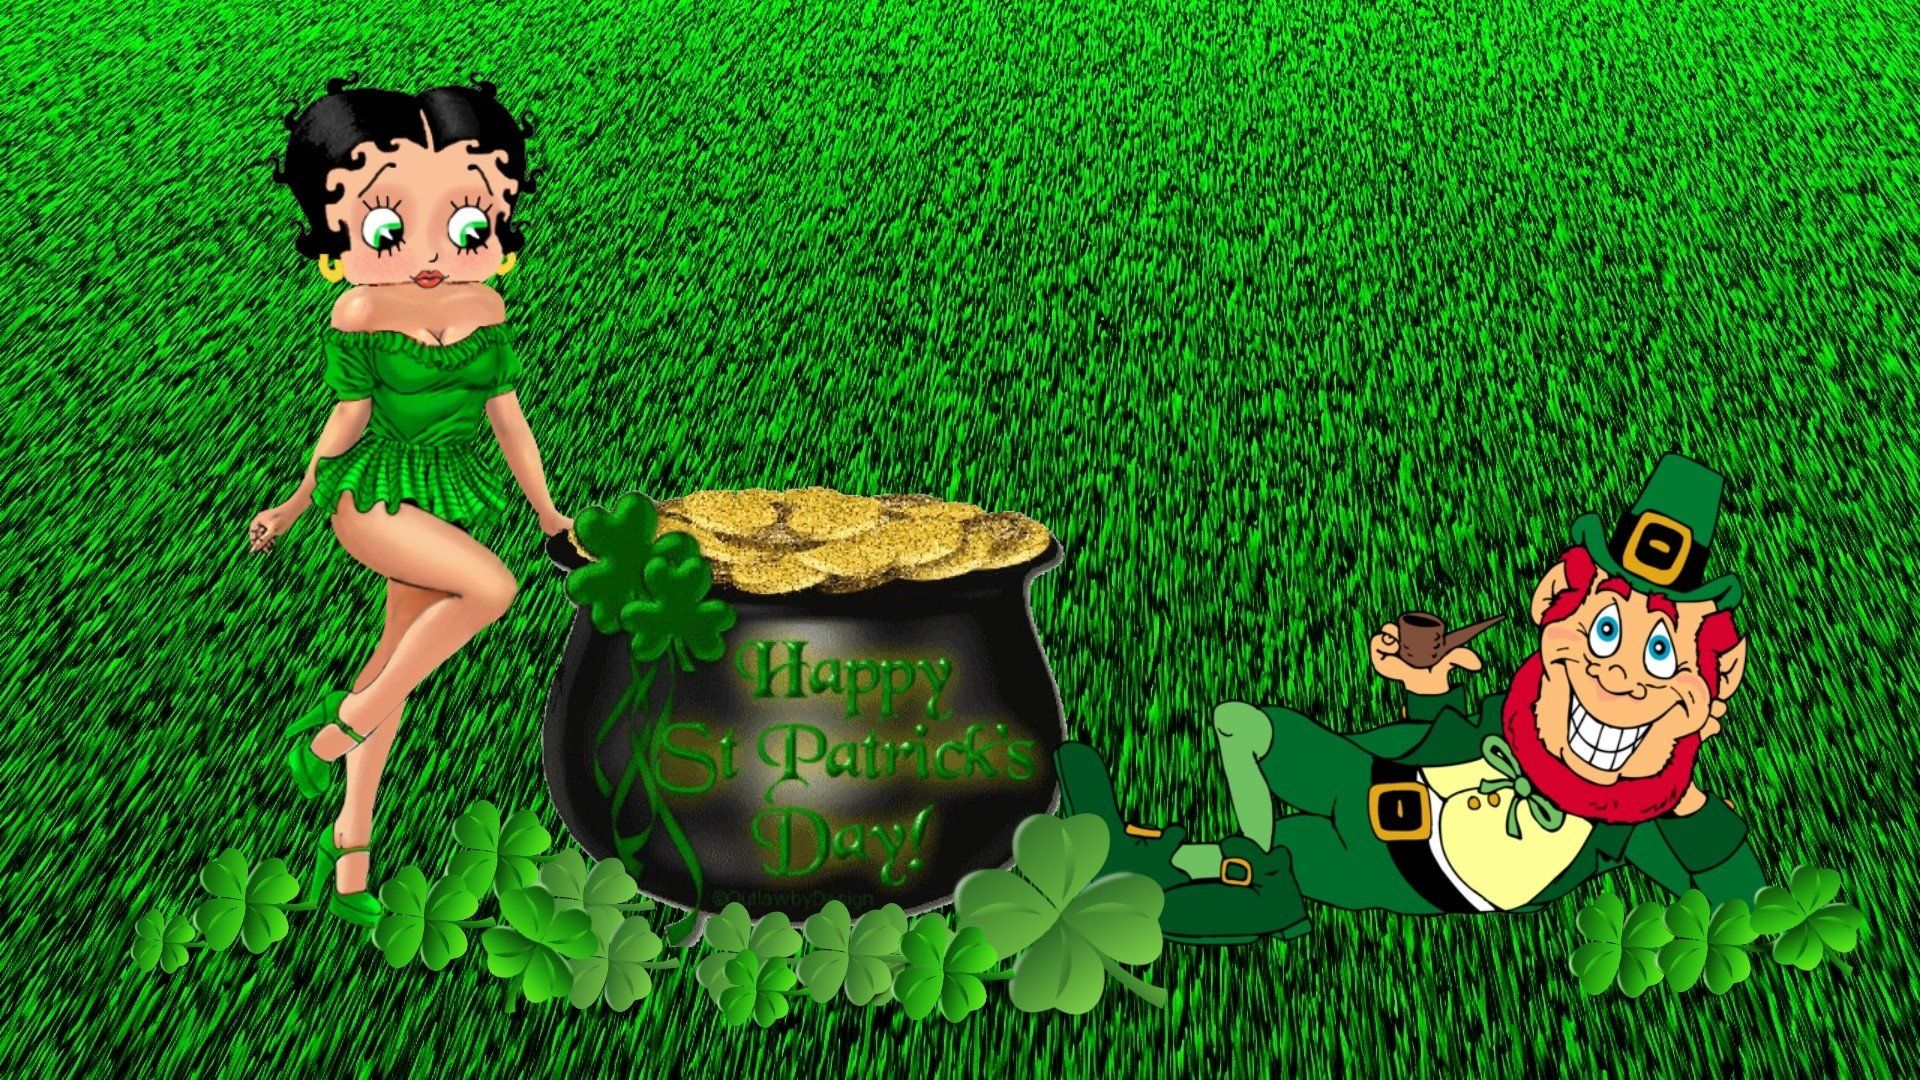 St. Patrick's Day HD Wallpaper and Background Image